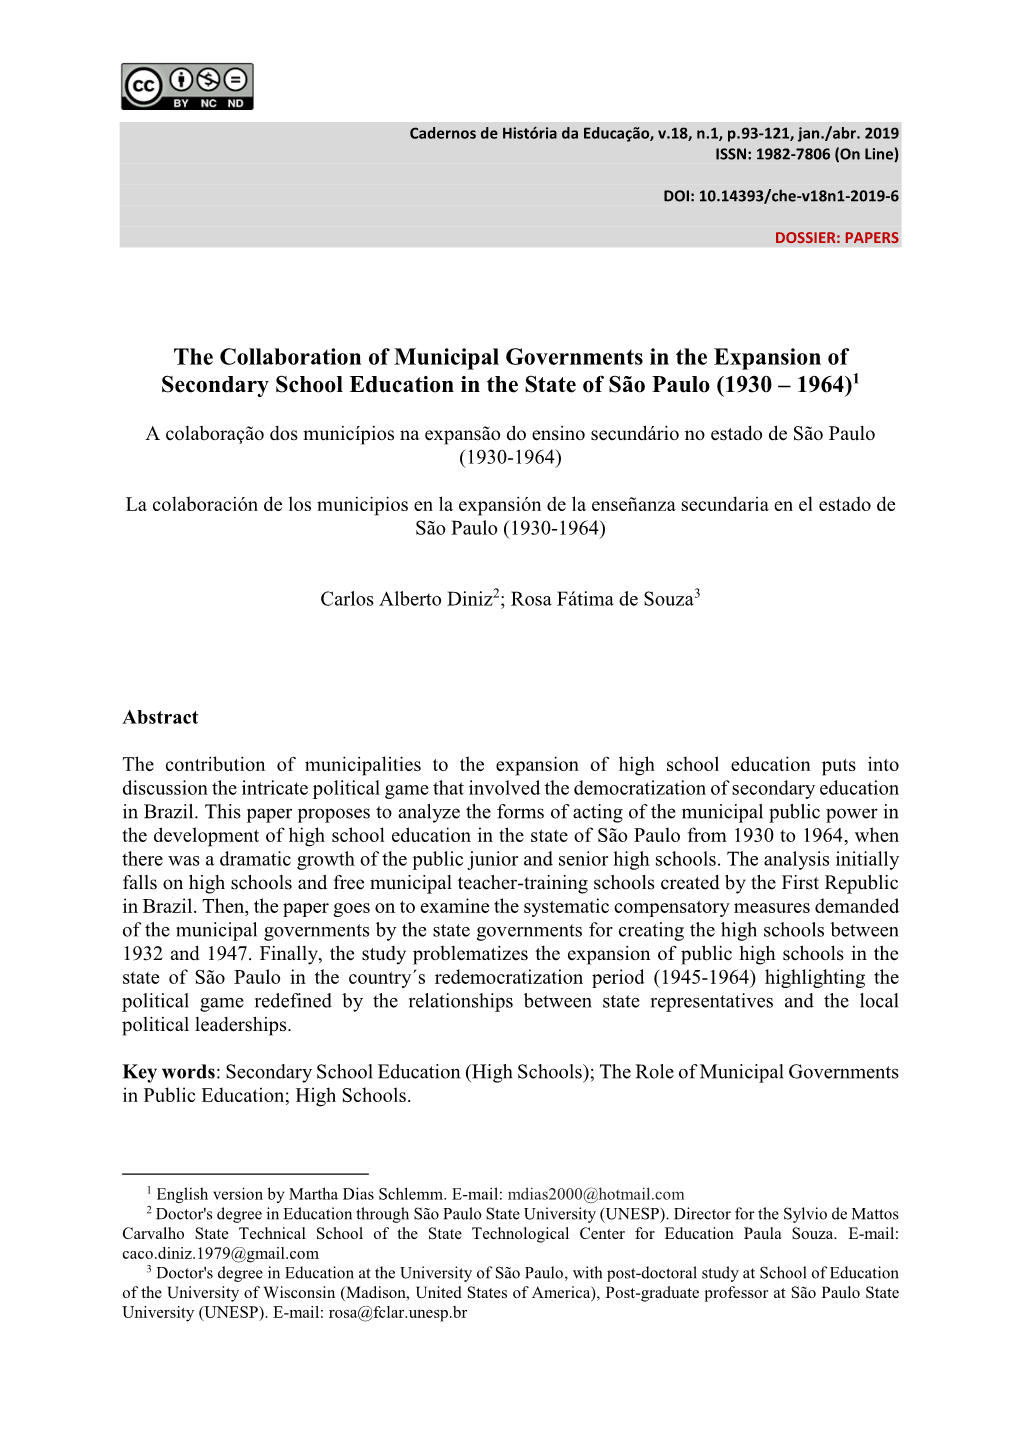 The Collaboration of Municipal Governments in the Expansion of Secondary School Education in the State of São Paulo (1930 – 1964)1